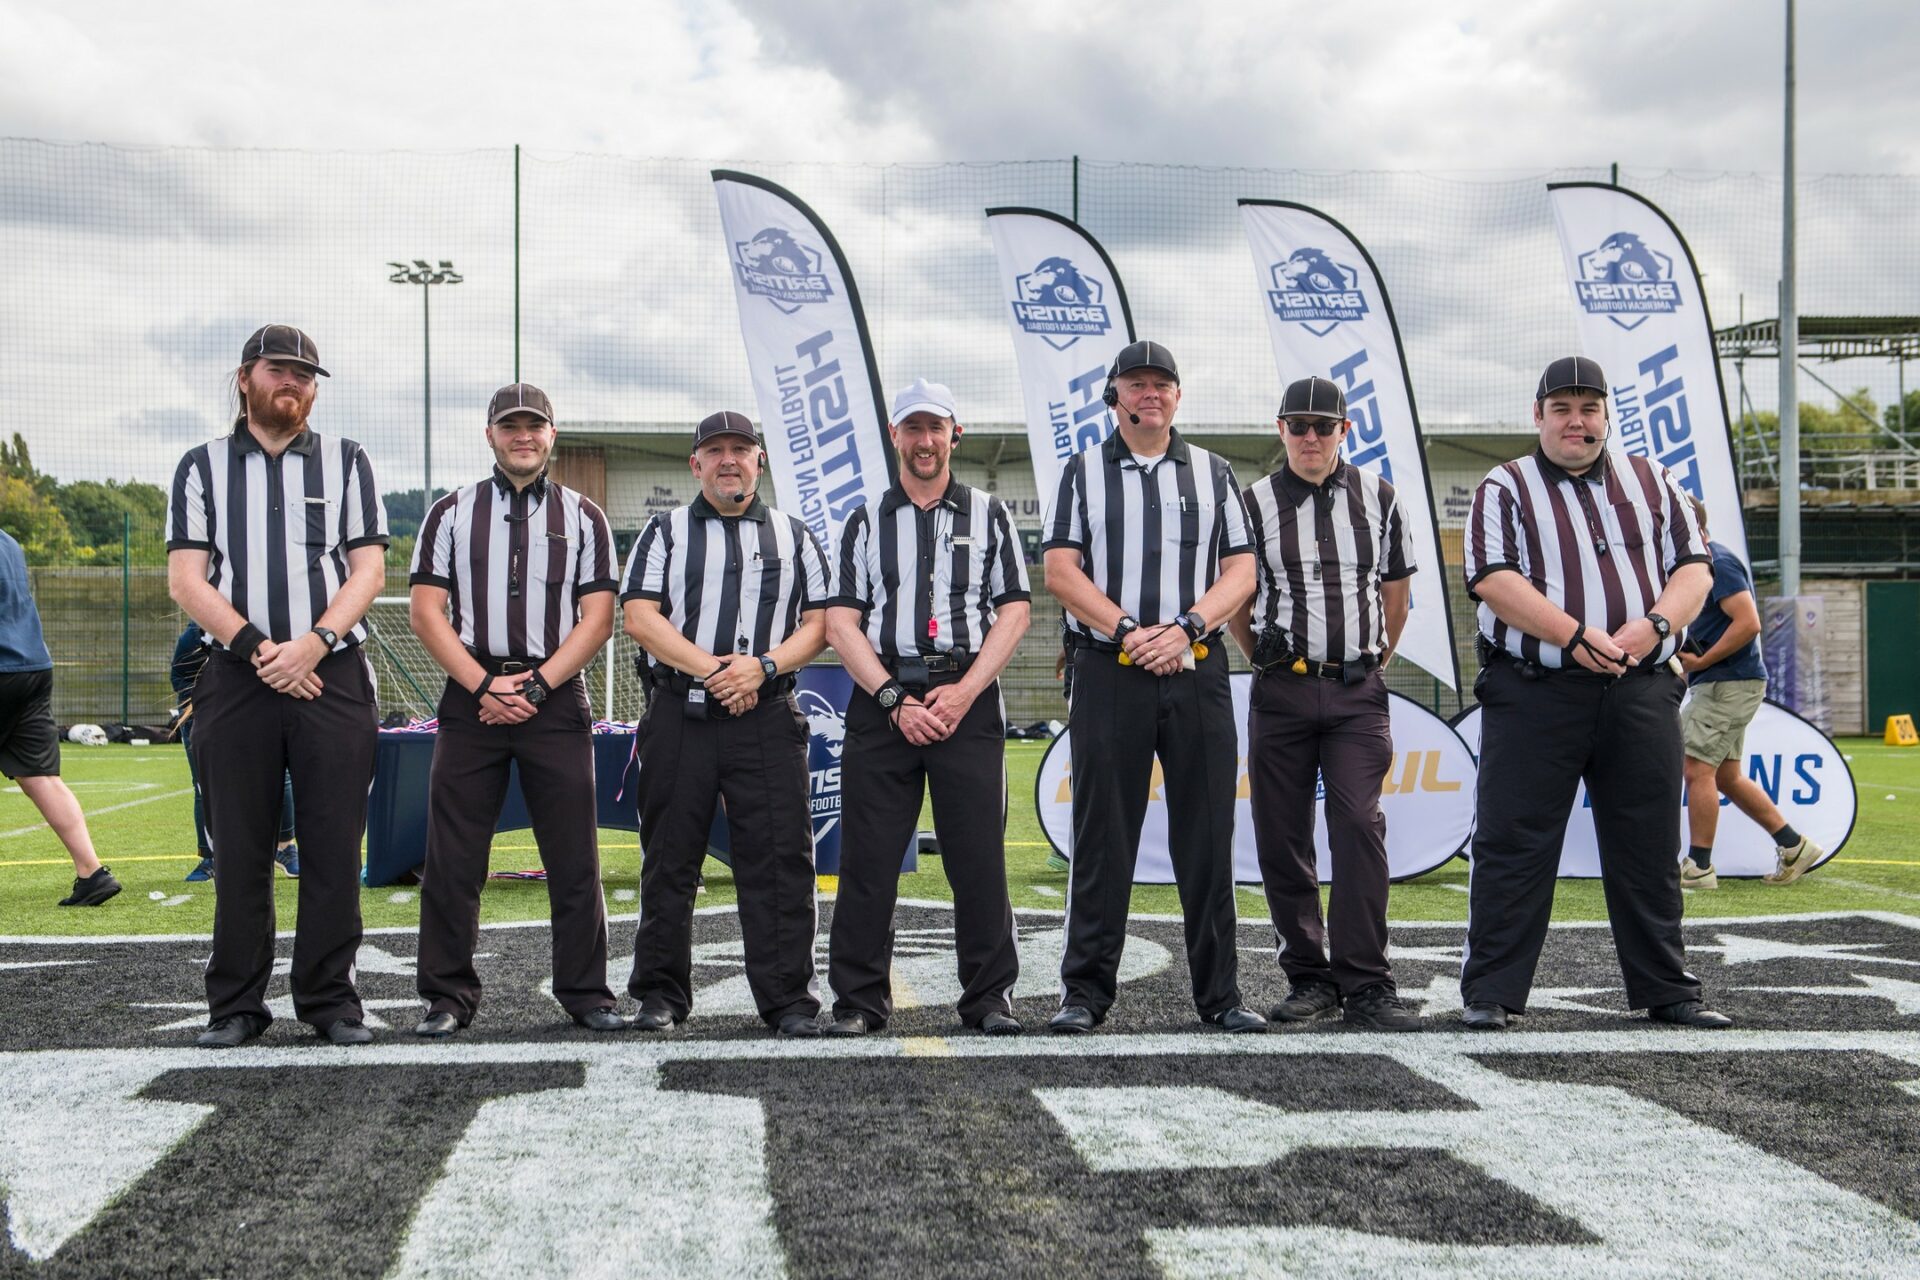 BAFA Rules Committee- Contact rules changes for 2024